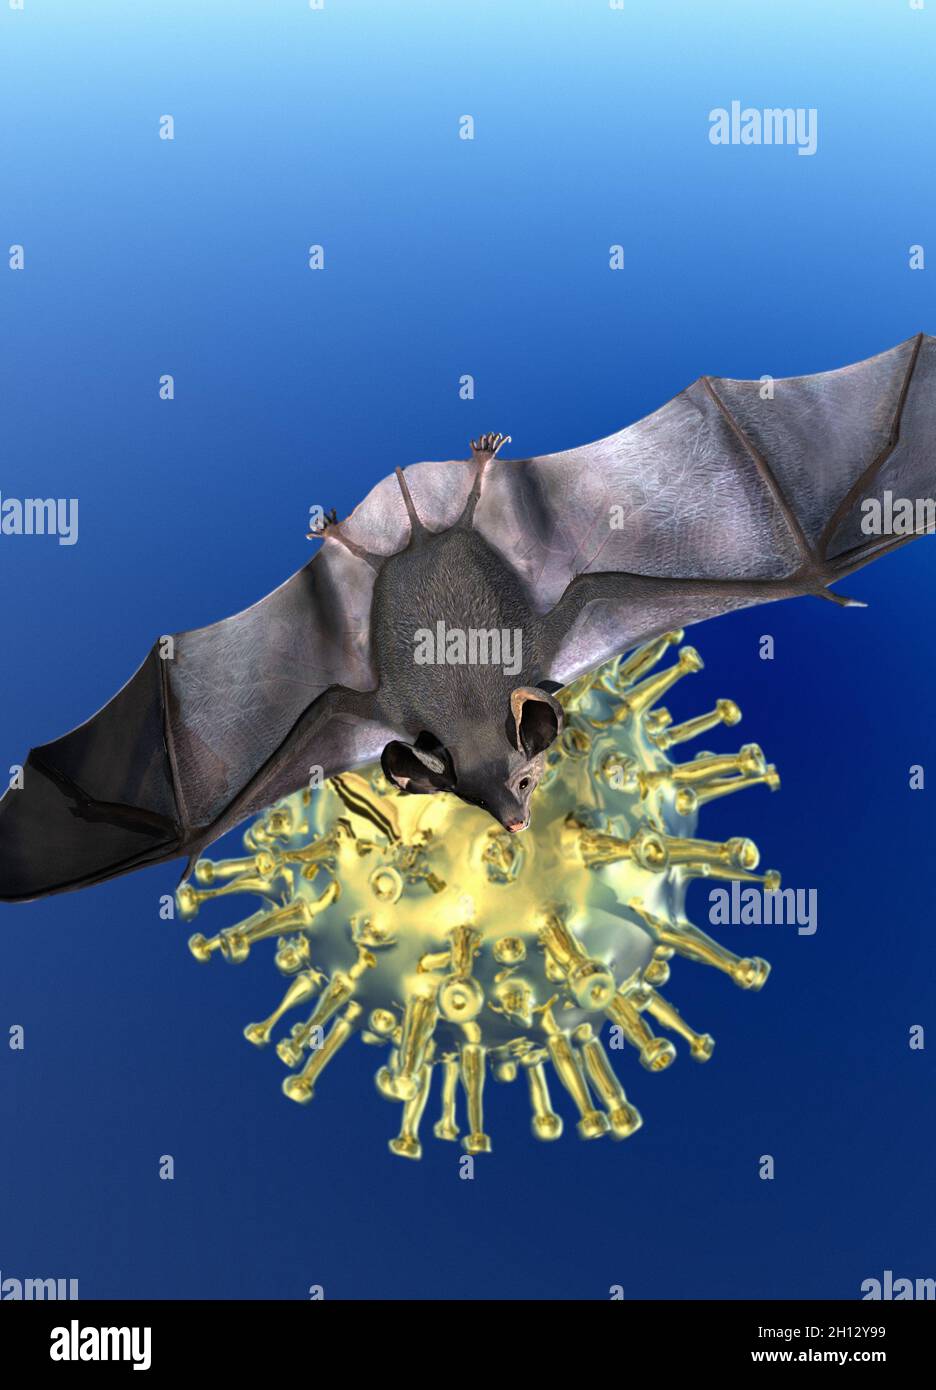 Bat and Covid-19 particle, illustration Stock Photo